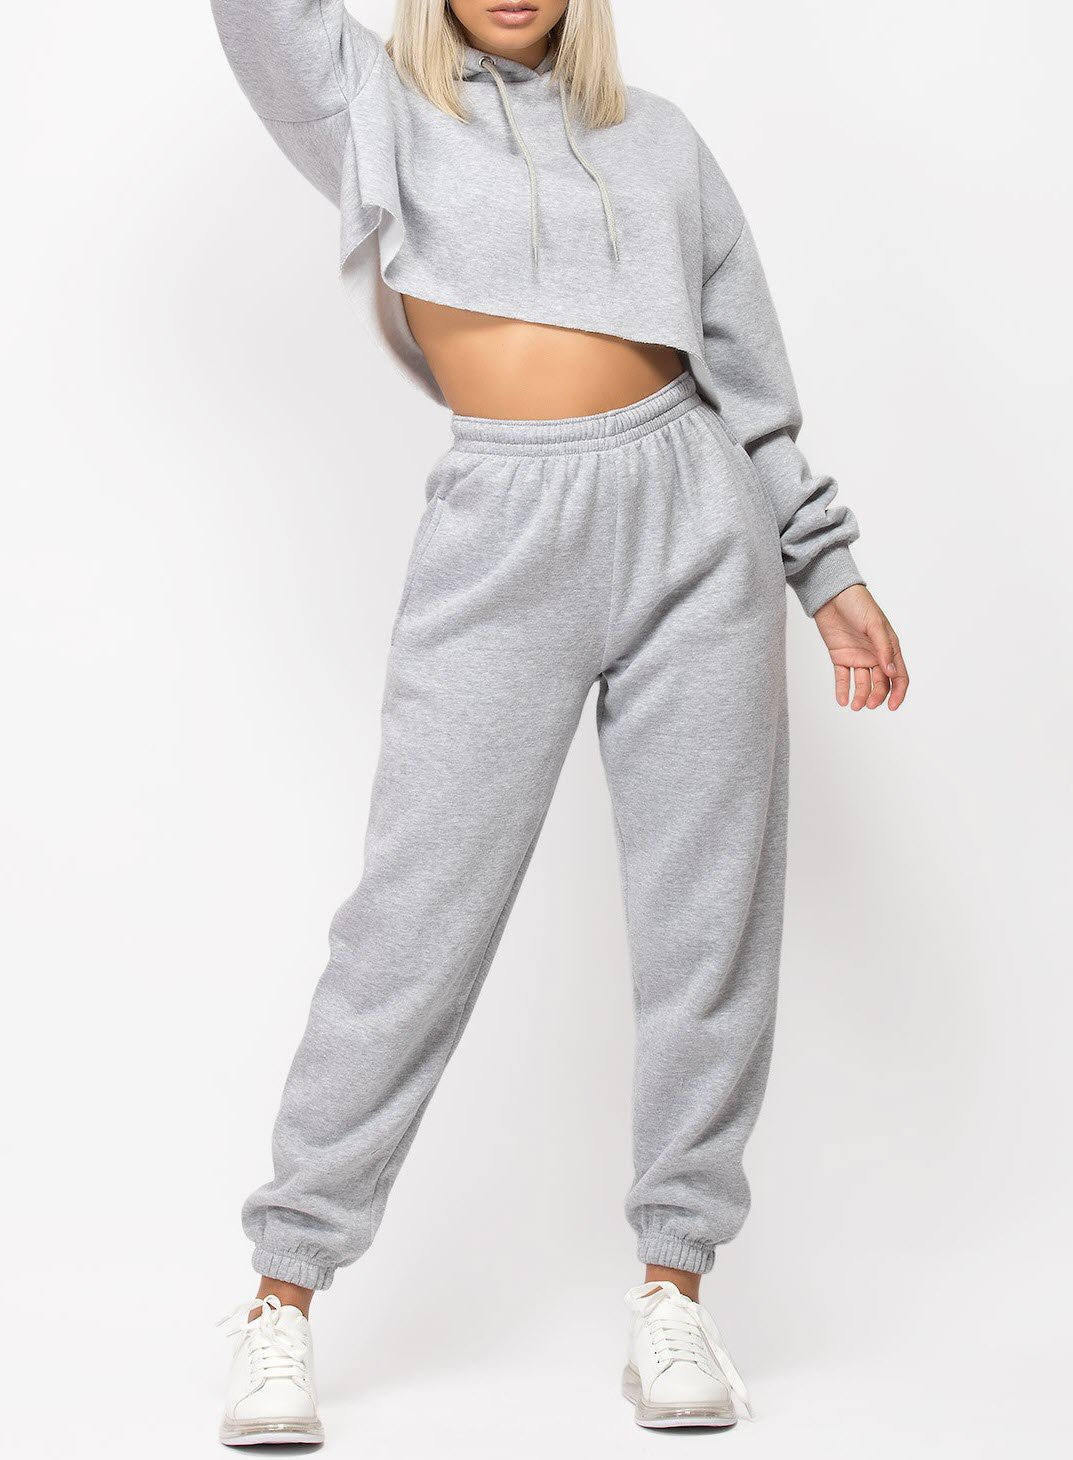 Comfortable Oversized Cropped Hooded SweatSuit in Gray Color